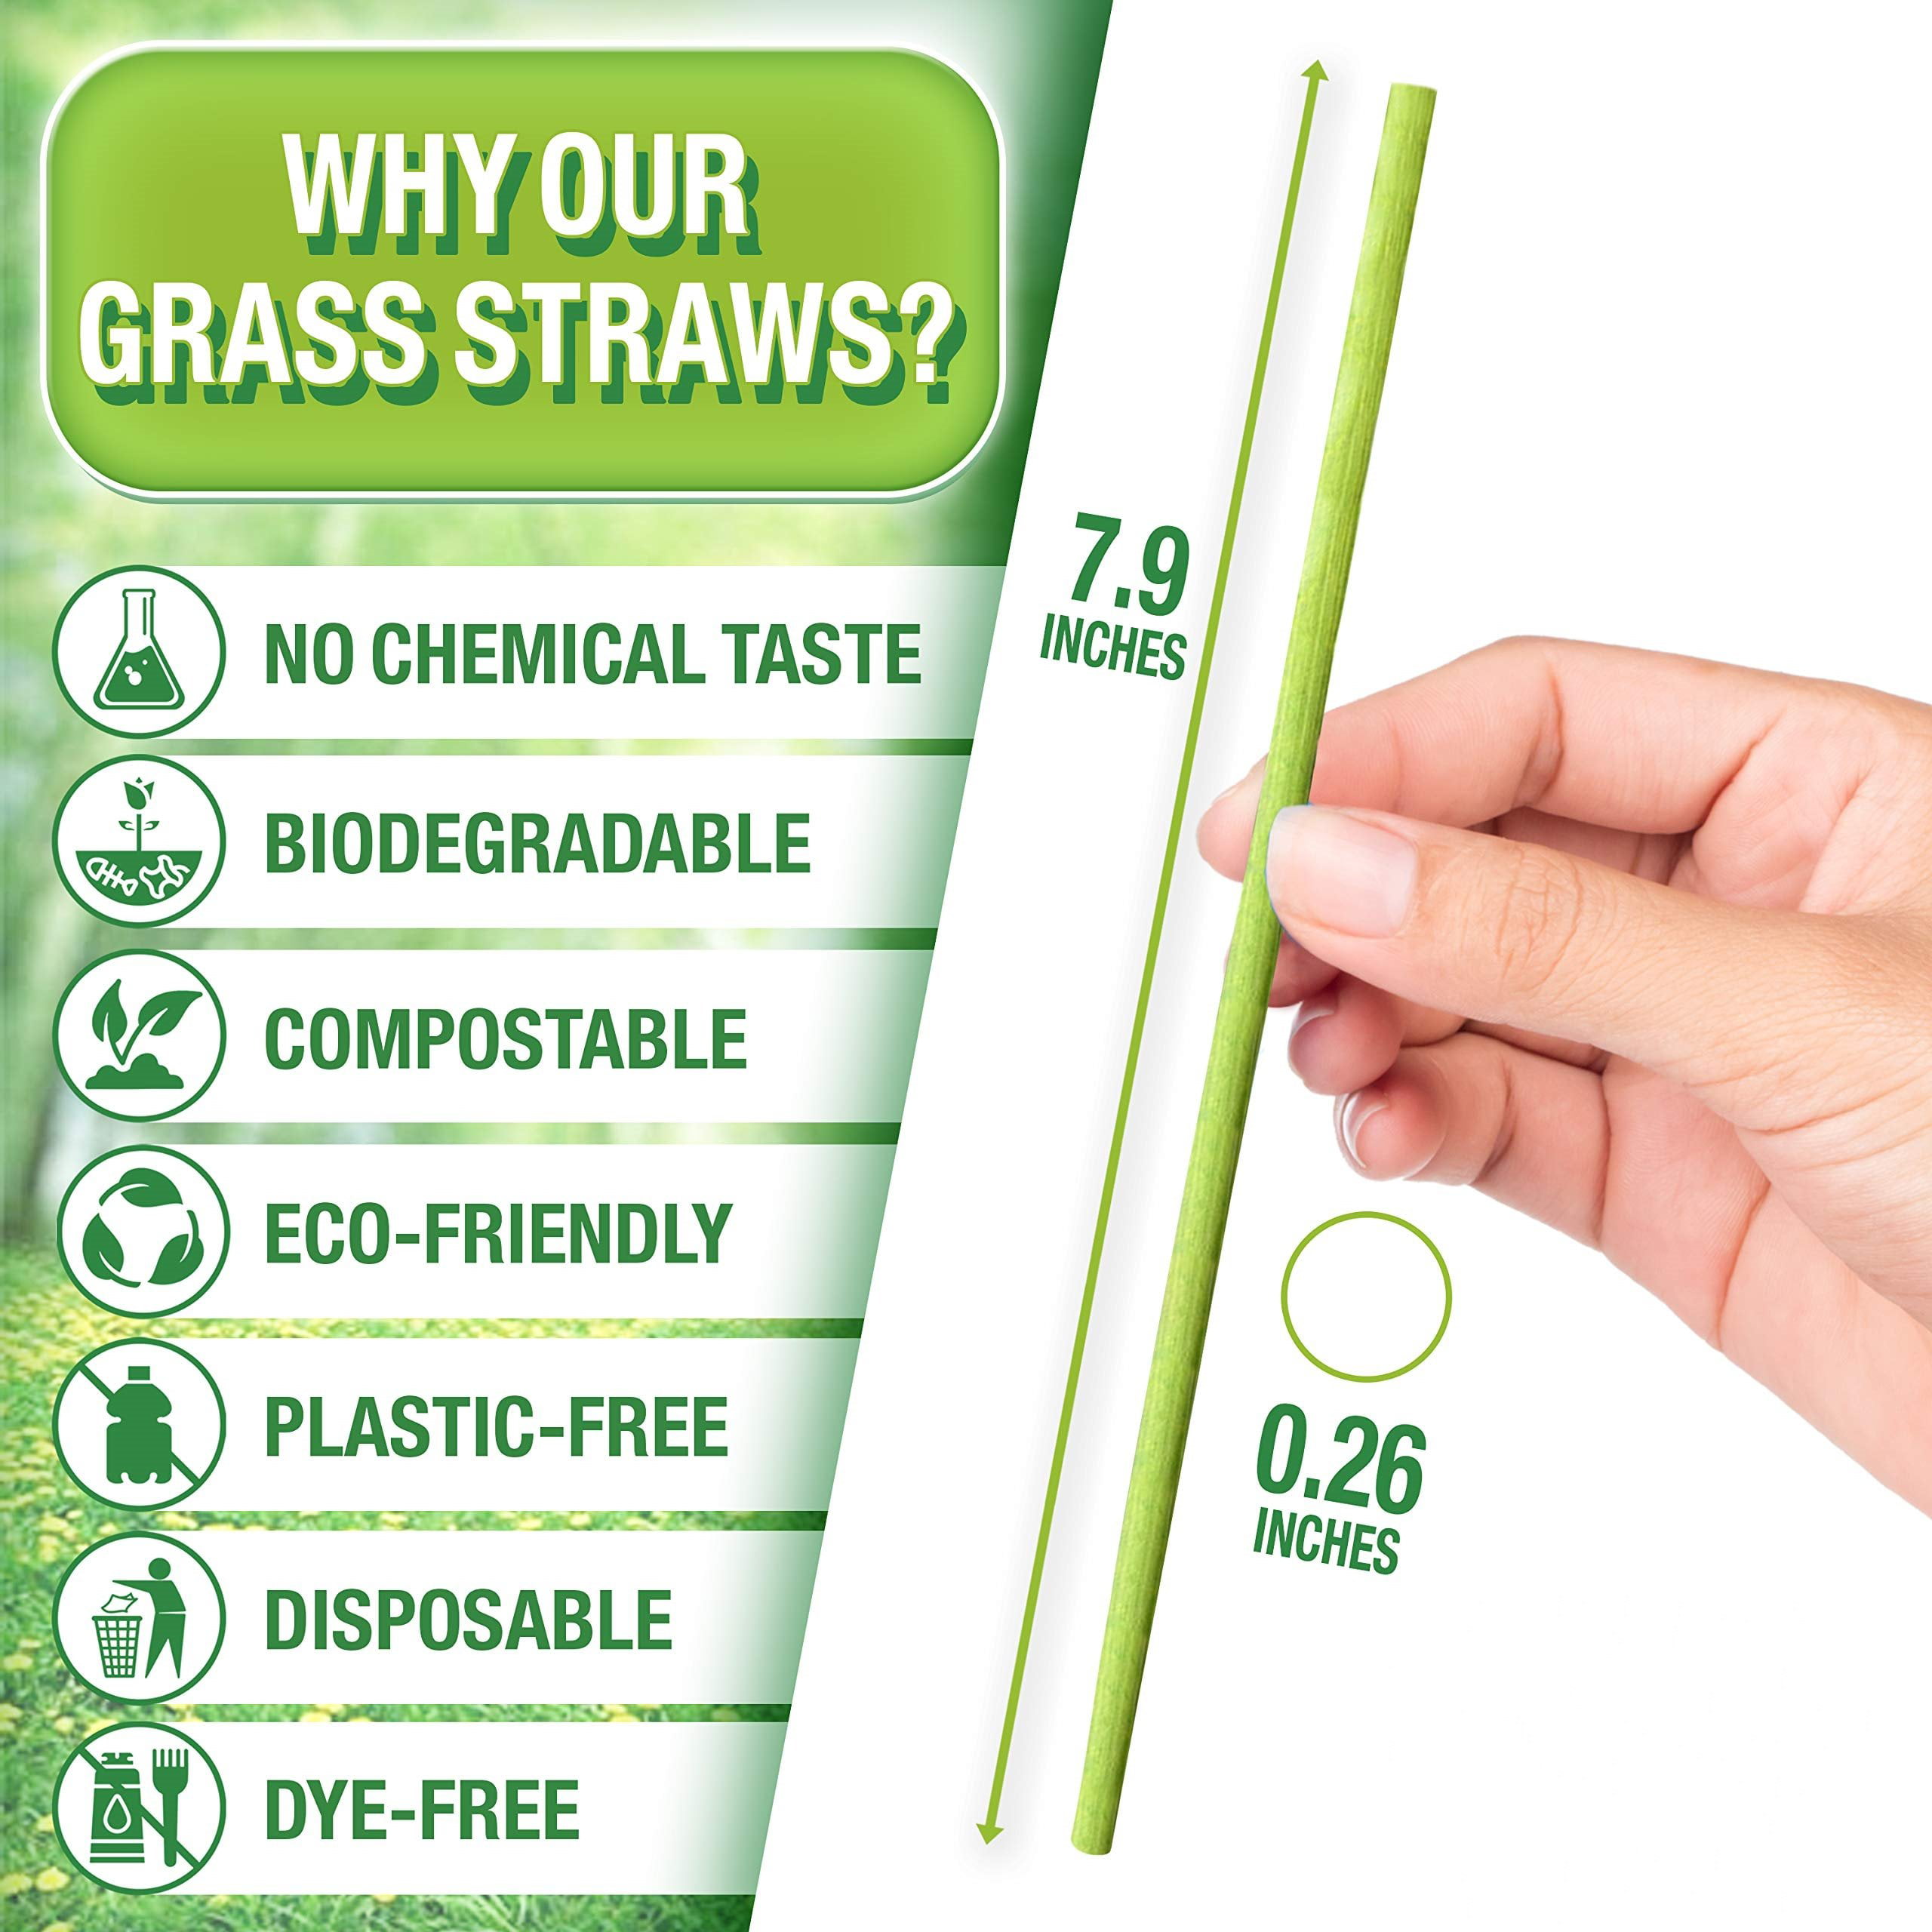 Grass Drinking Straws - Great Prices, Buy Now